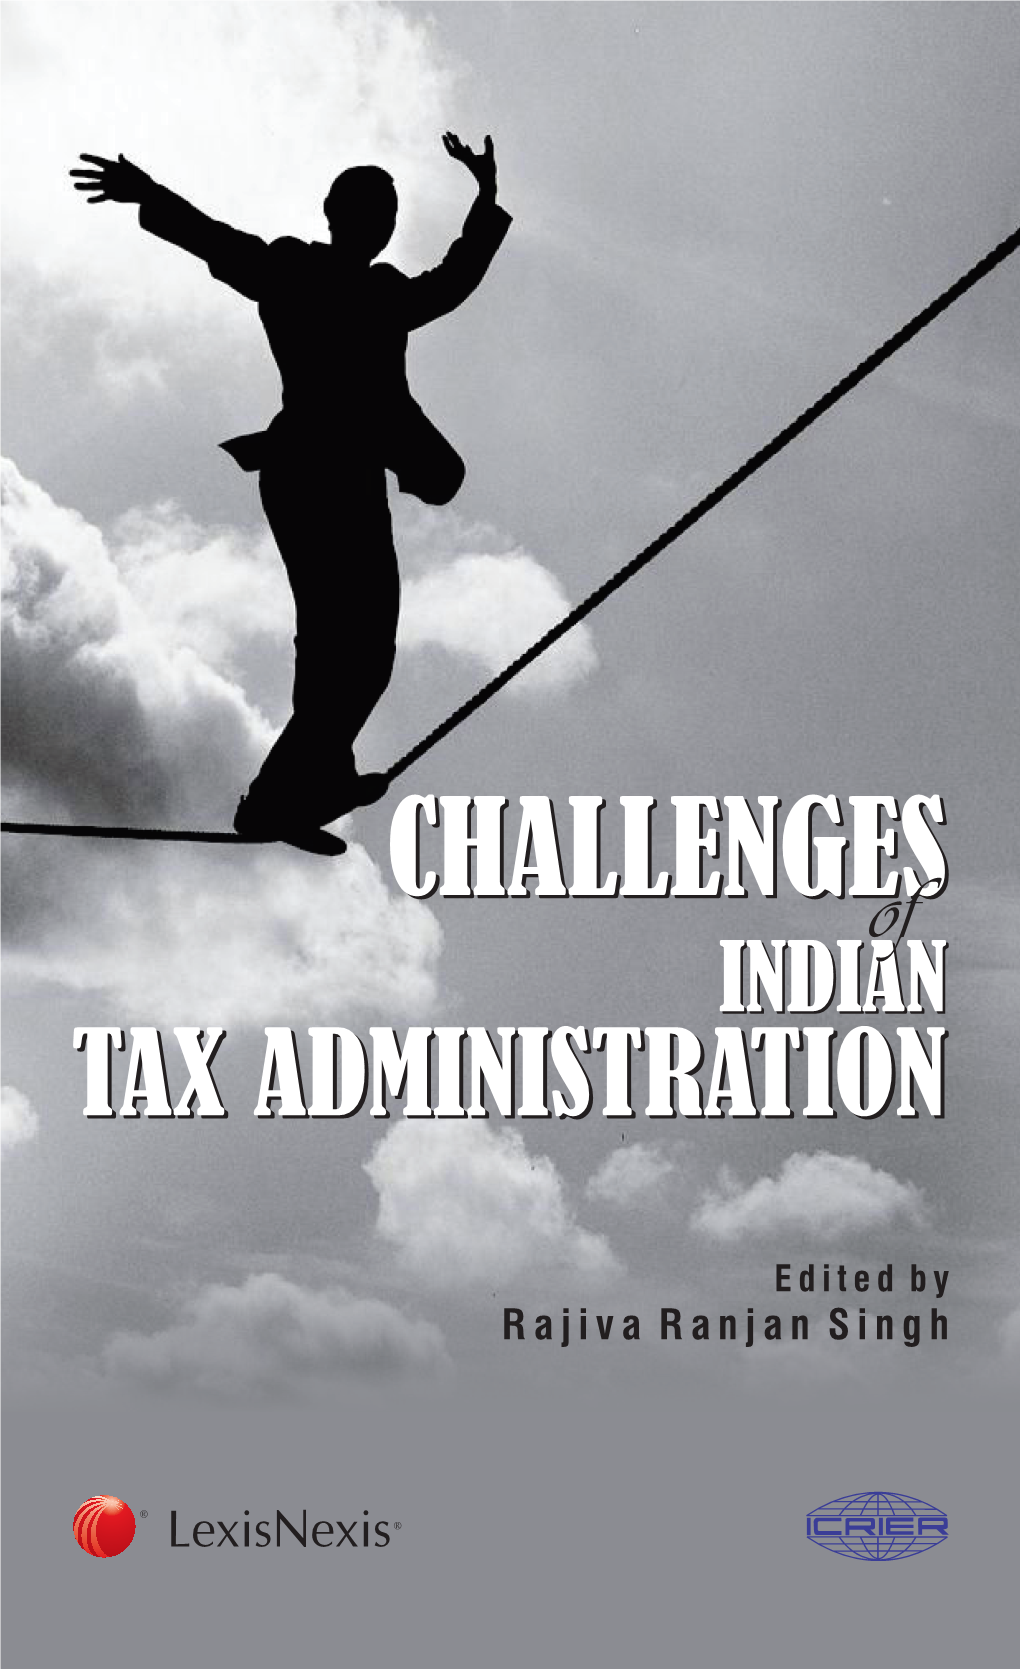 Challenges of Indian Tax Administration and Tax Dispute Forums